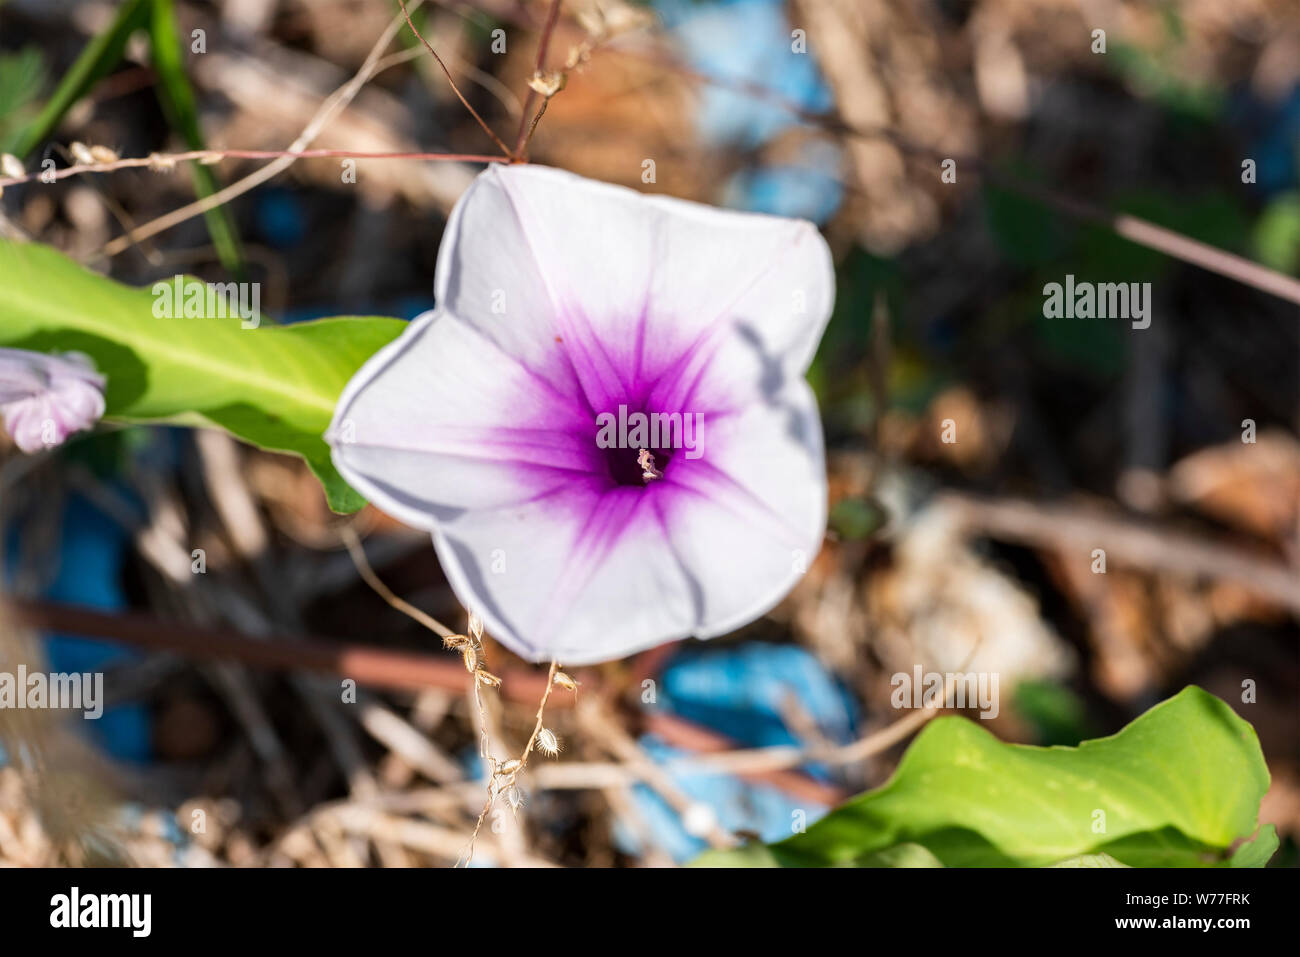 Ipomoea, pink flower, close-up in natural light. Koh Chang Island, Thailand. Stock Photo